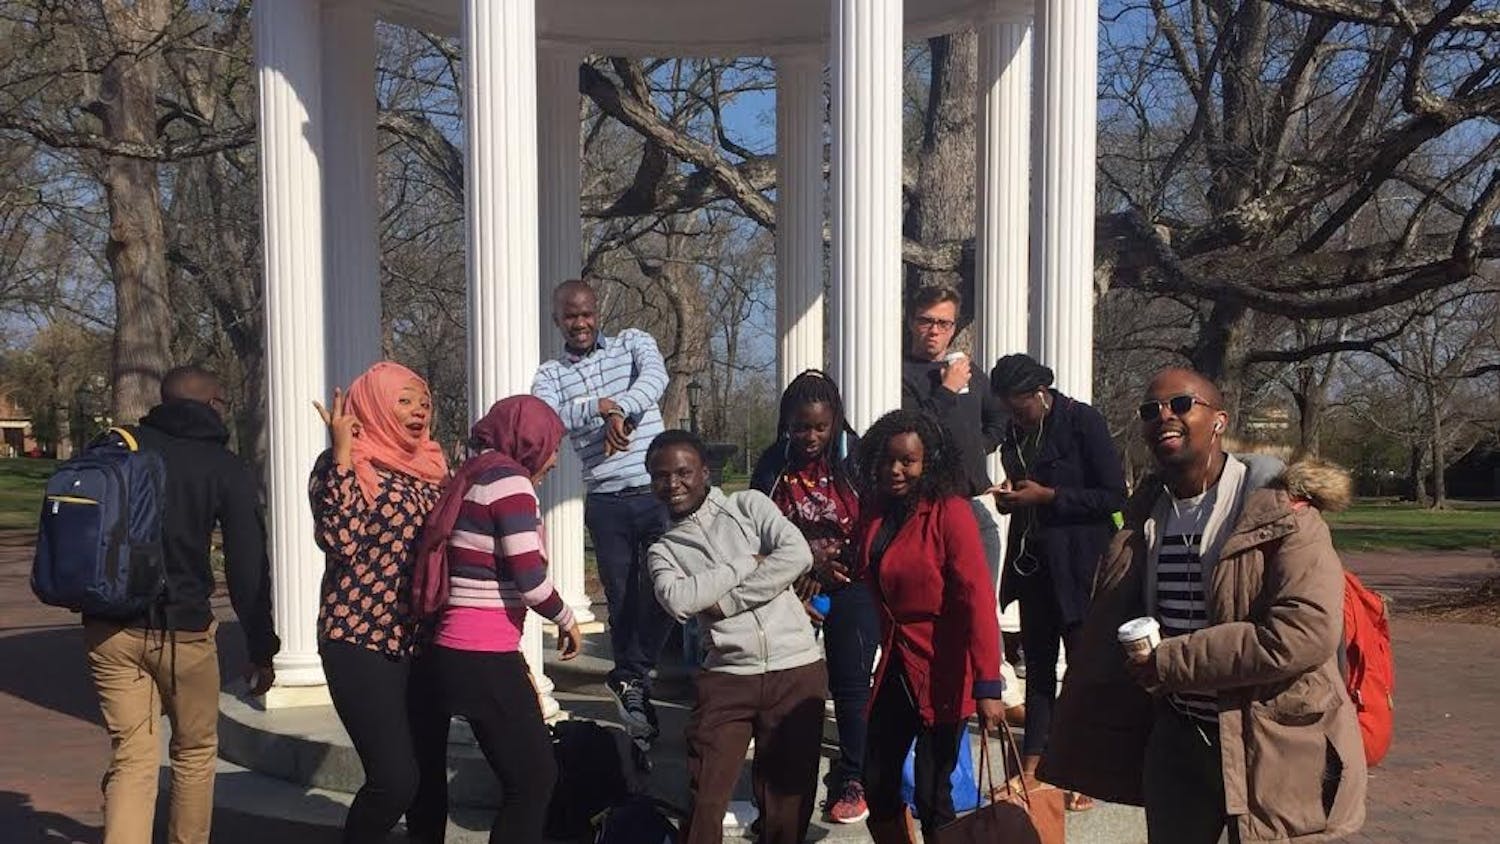 The African exchange program works to bring African student leaders to the UNC campus. Photo courtesy of Bradley Opere.